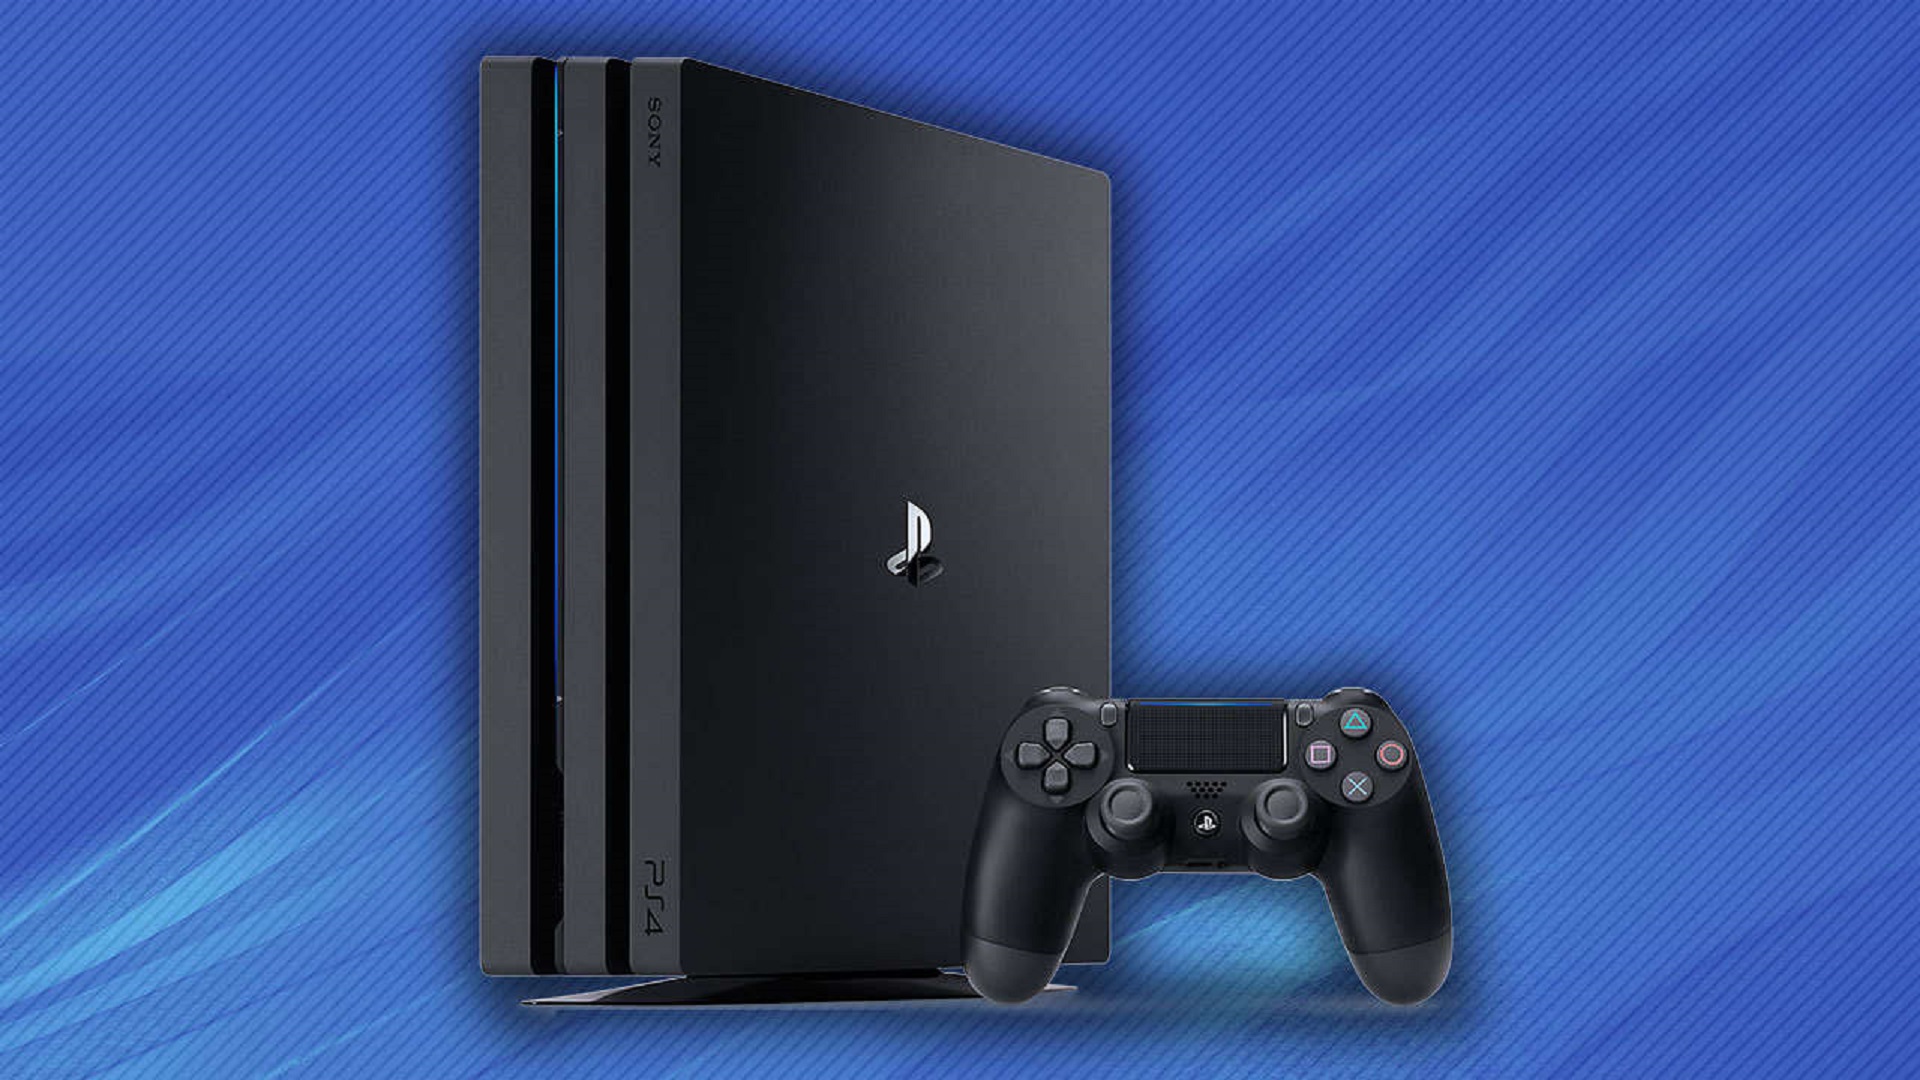 Ps4 live. Сони ПС 4. Sony PLAYSTATION ps4 Pro. Sony PLAYSTATION 4 Pro 1tb. Sony PLAYSTATION 4 ps4.